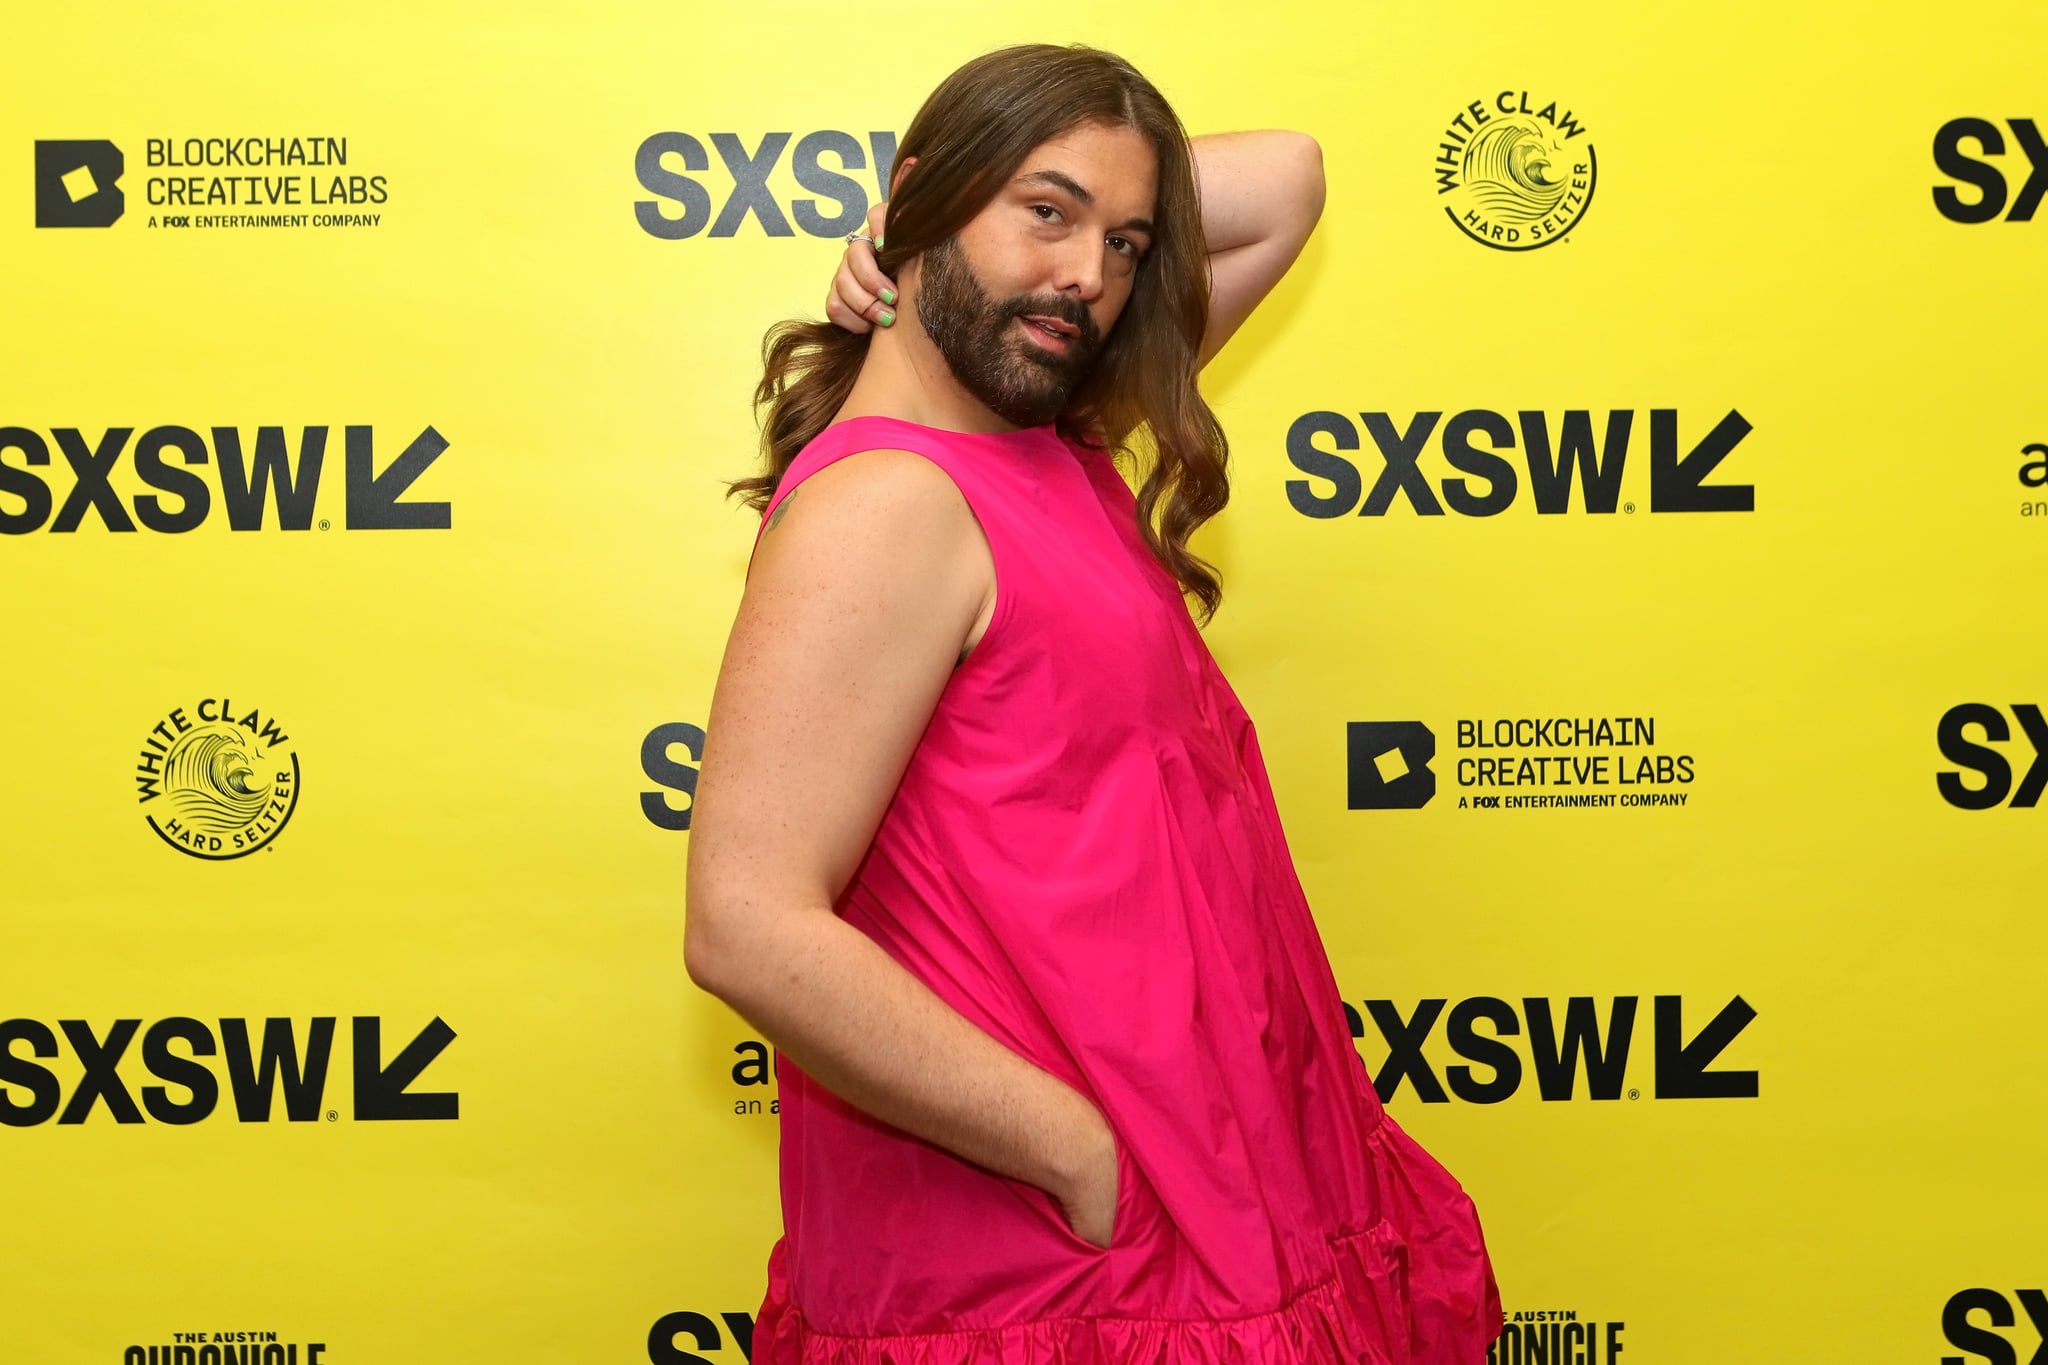 AUSTIN, TEXAS - MARCH 14: Jonathan Van Ness attends Featured Session: Jonathan Van Ness & Alok Vaid-Menon during the 2022 SXSW Conference and Festivals at JW Marriott Austin on March 14, 2022 in Austin, Texas. (Photo by Samantha Burkardt/Getty Images for SXSW)